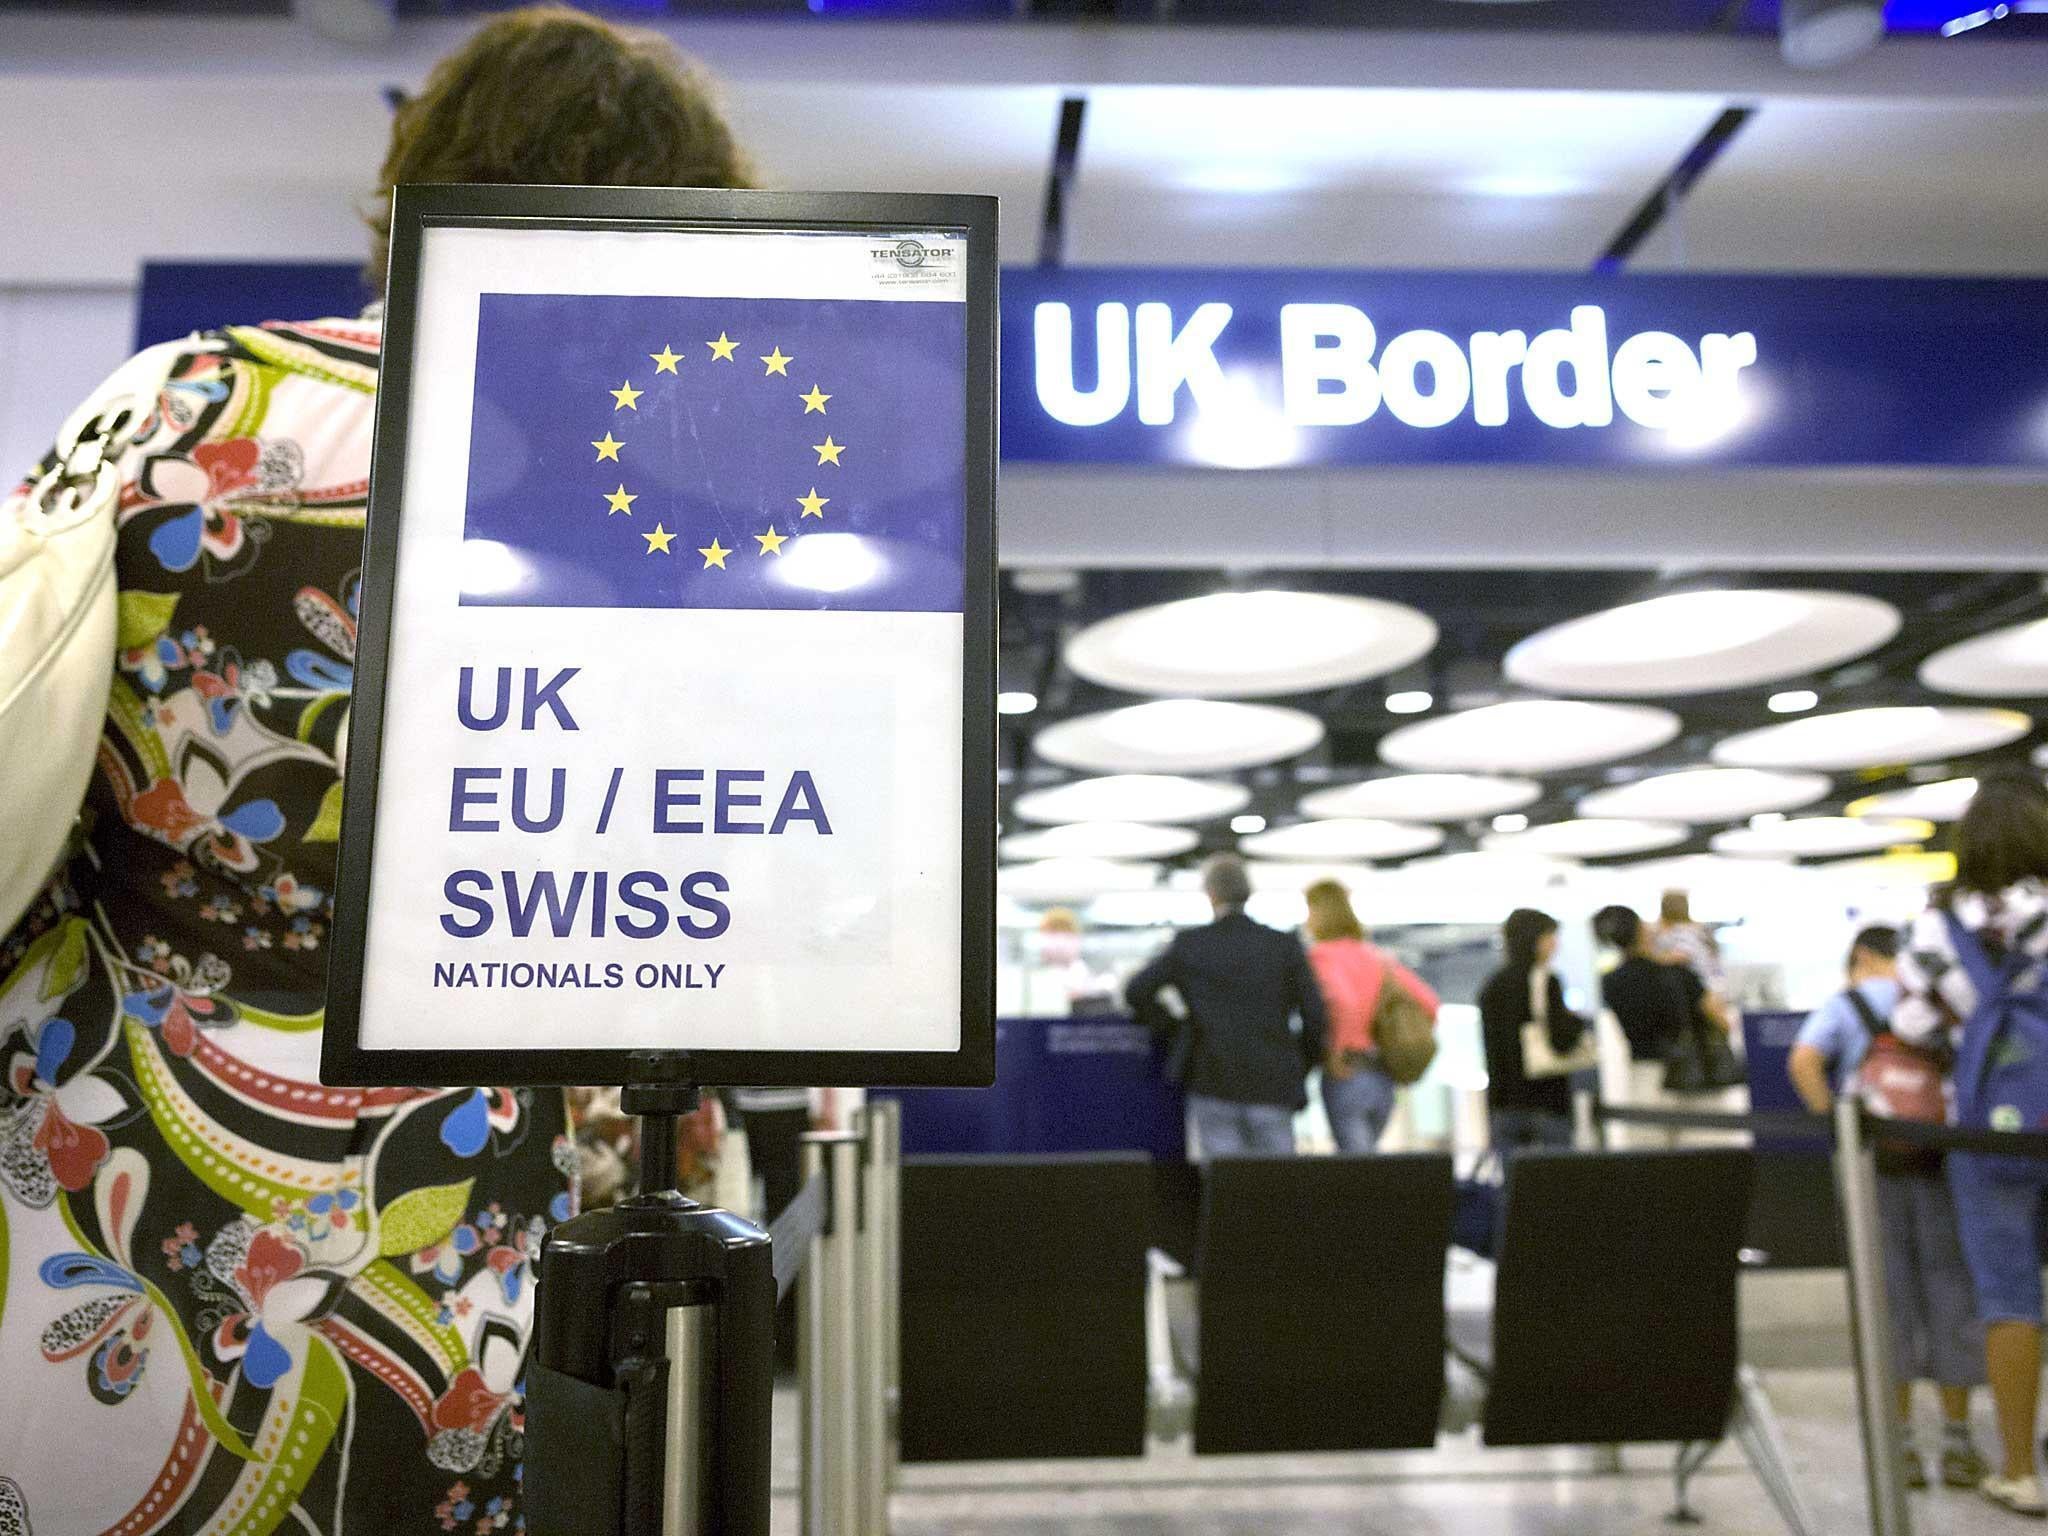 The Institute for Economic Affairs says UK should embrace immigration